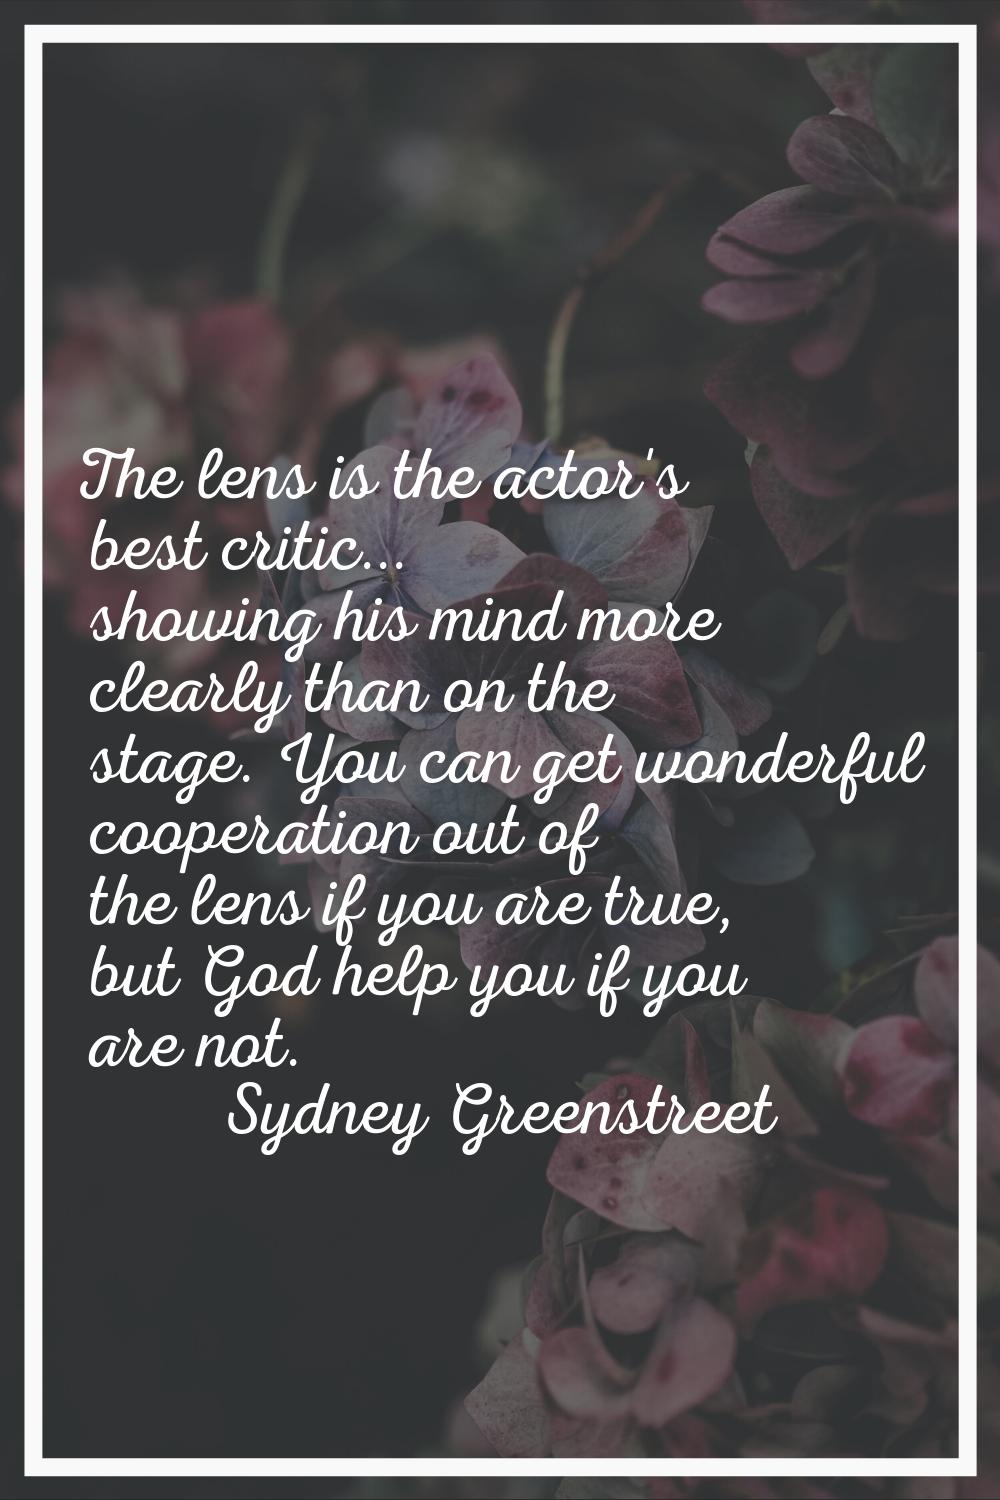 The lens is the actor's best critic... showing his mind more clearly than on the stage. You can get